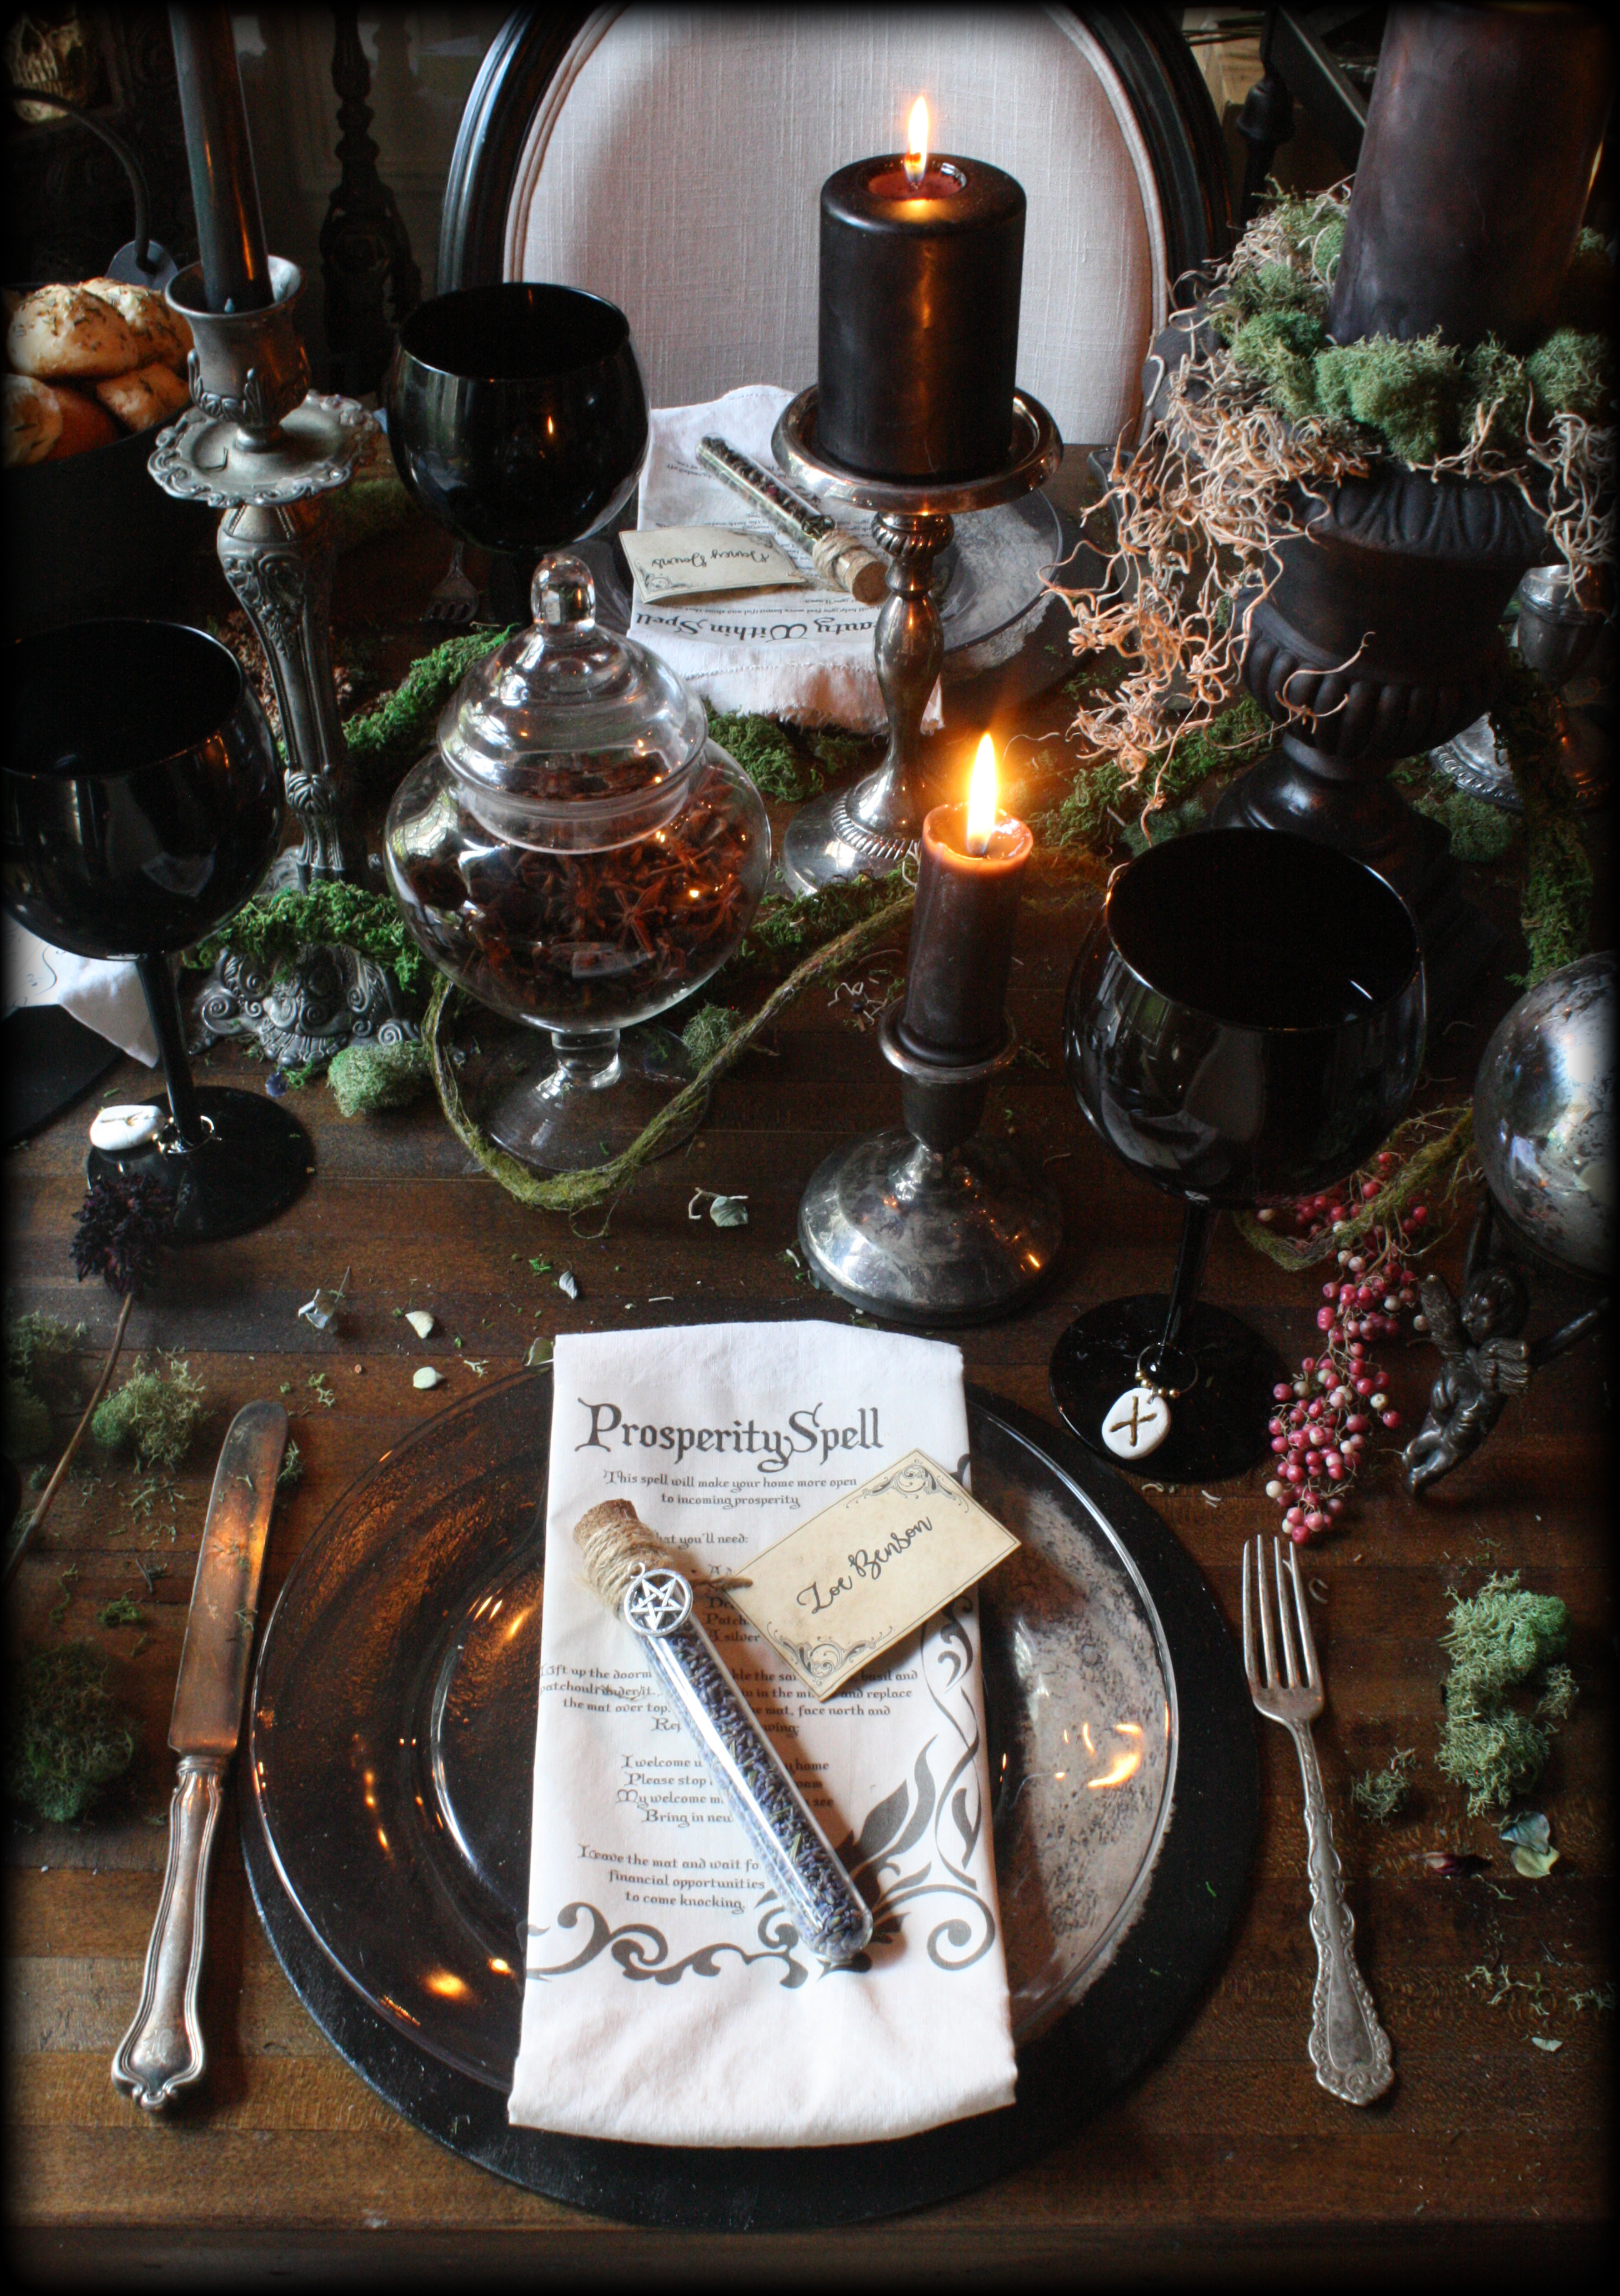 Witches Dinner Party | Witchcraft Place Setting | Antique Silverware | Moon Phase Charger Plates | DIY Spell Napkins | Loose Leaf Tea Apothecary Vials | Rune Stone Wine Charms | www.MeandAnnabelLee.com